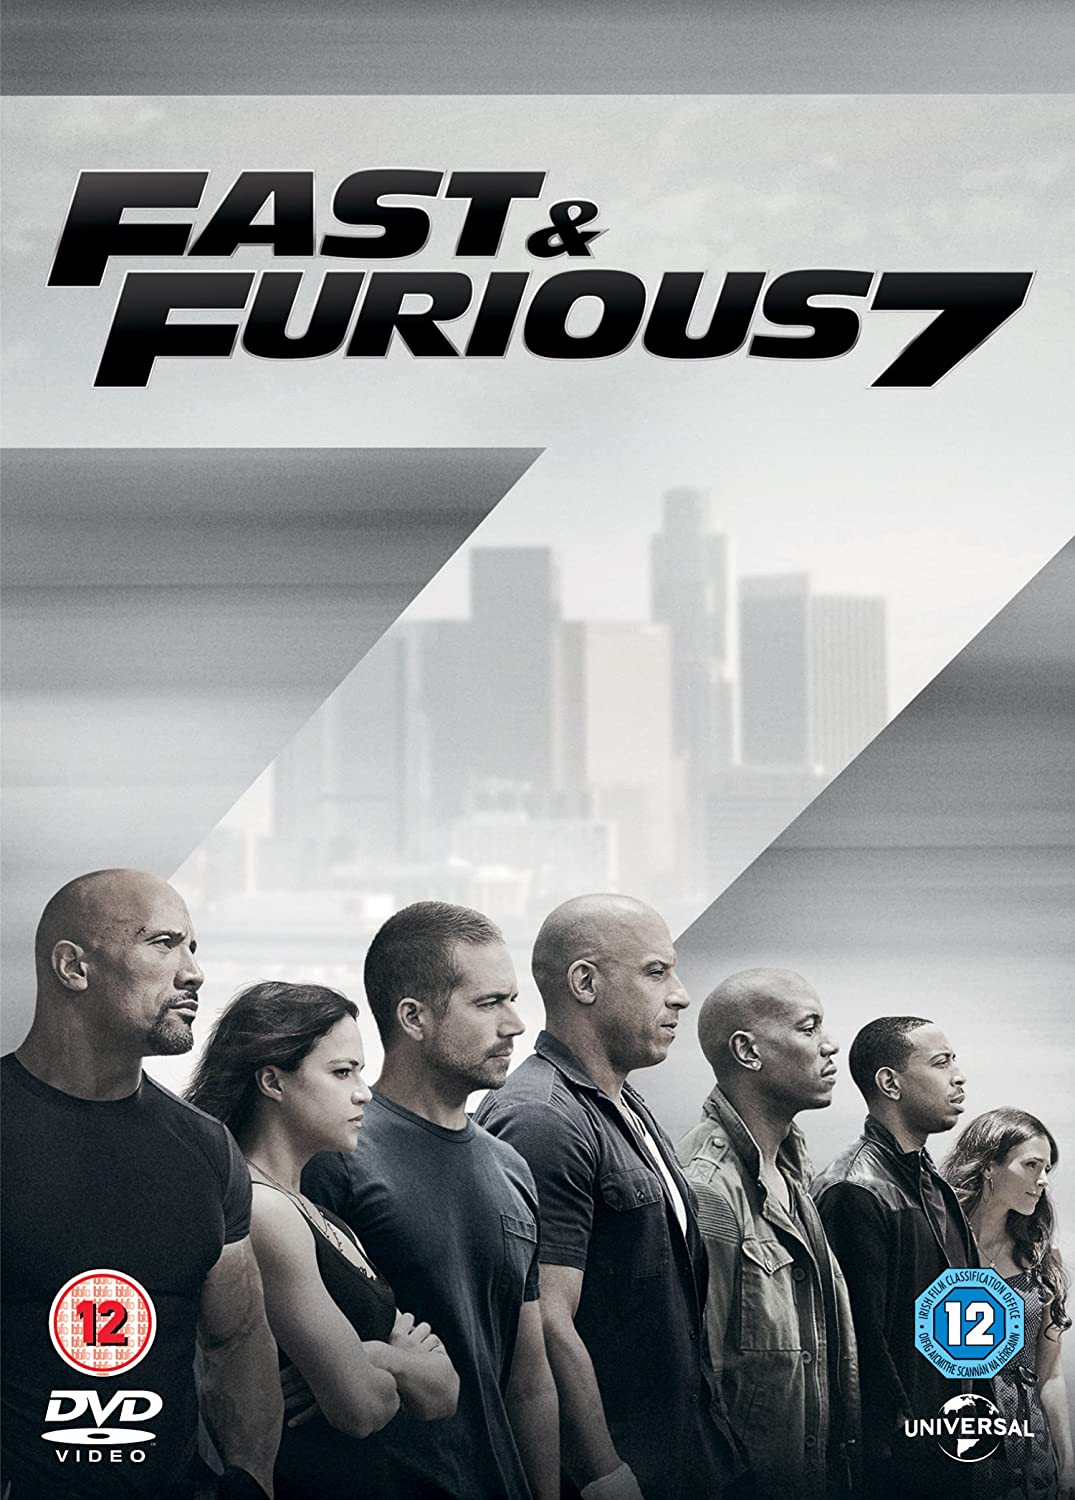 Fast & Furious 7 [2017] - Action/Crime [DVD]